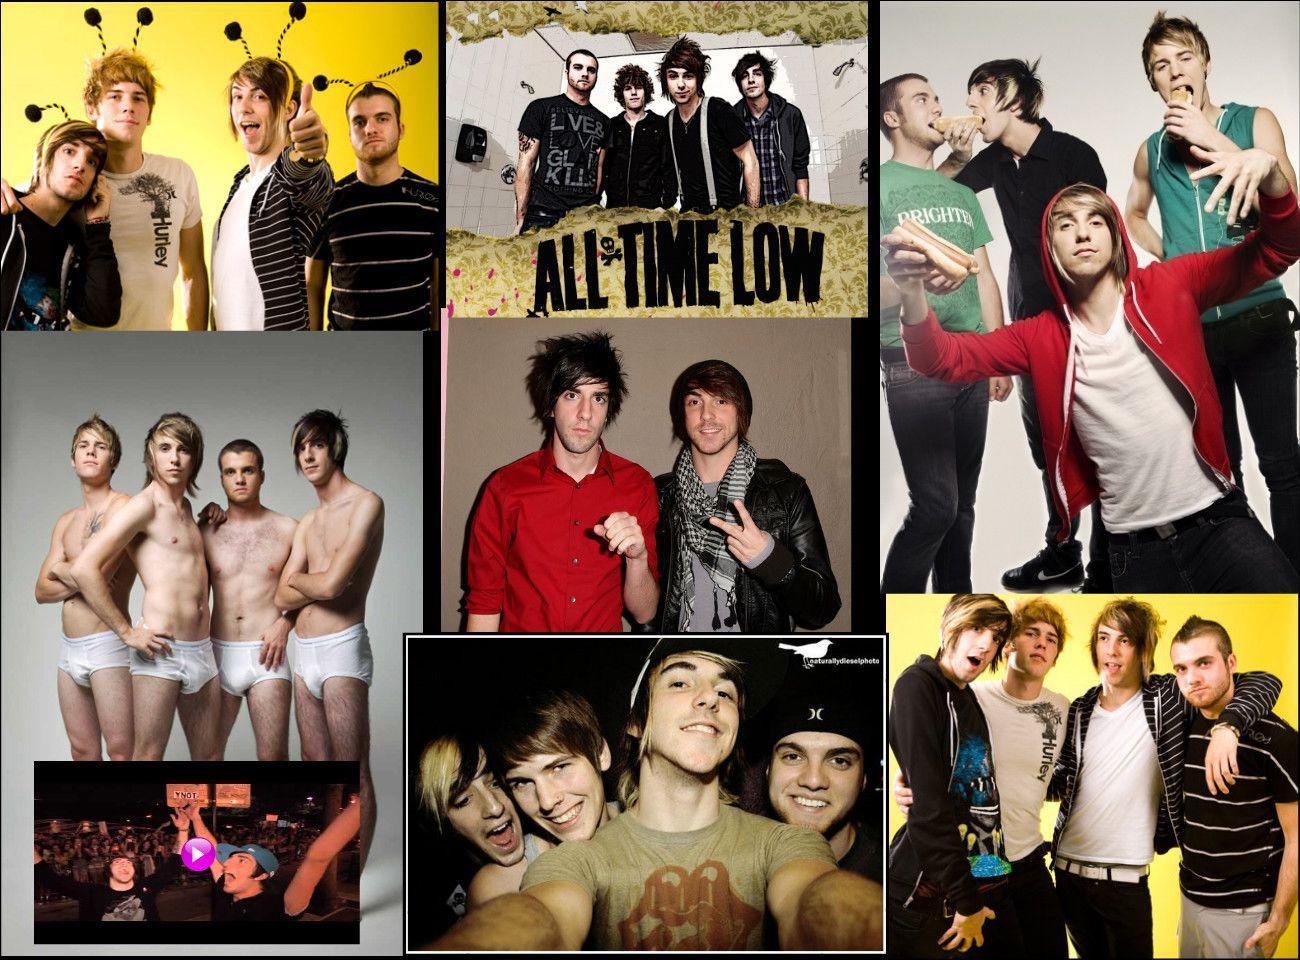 All Time Low Wallpaper, All Time Low Band Wallpaper And Desktop